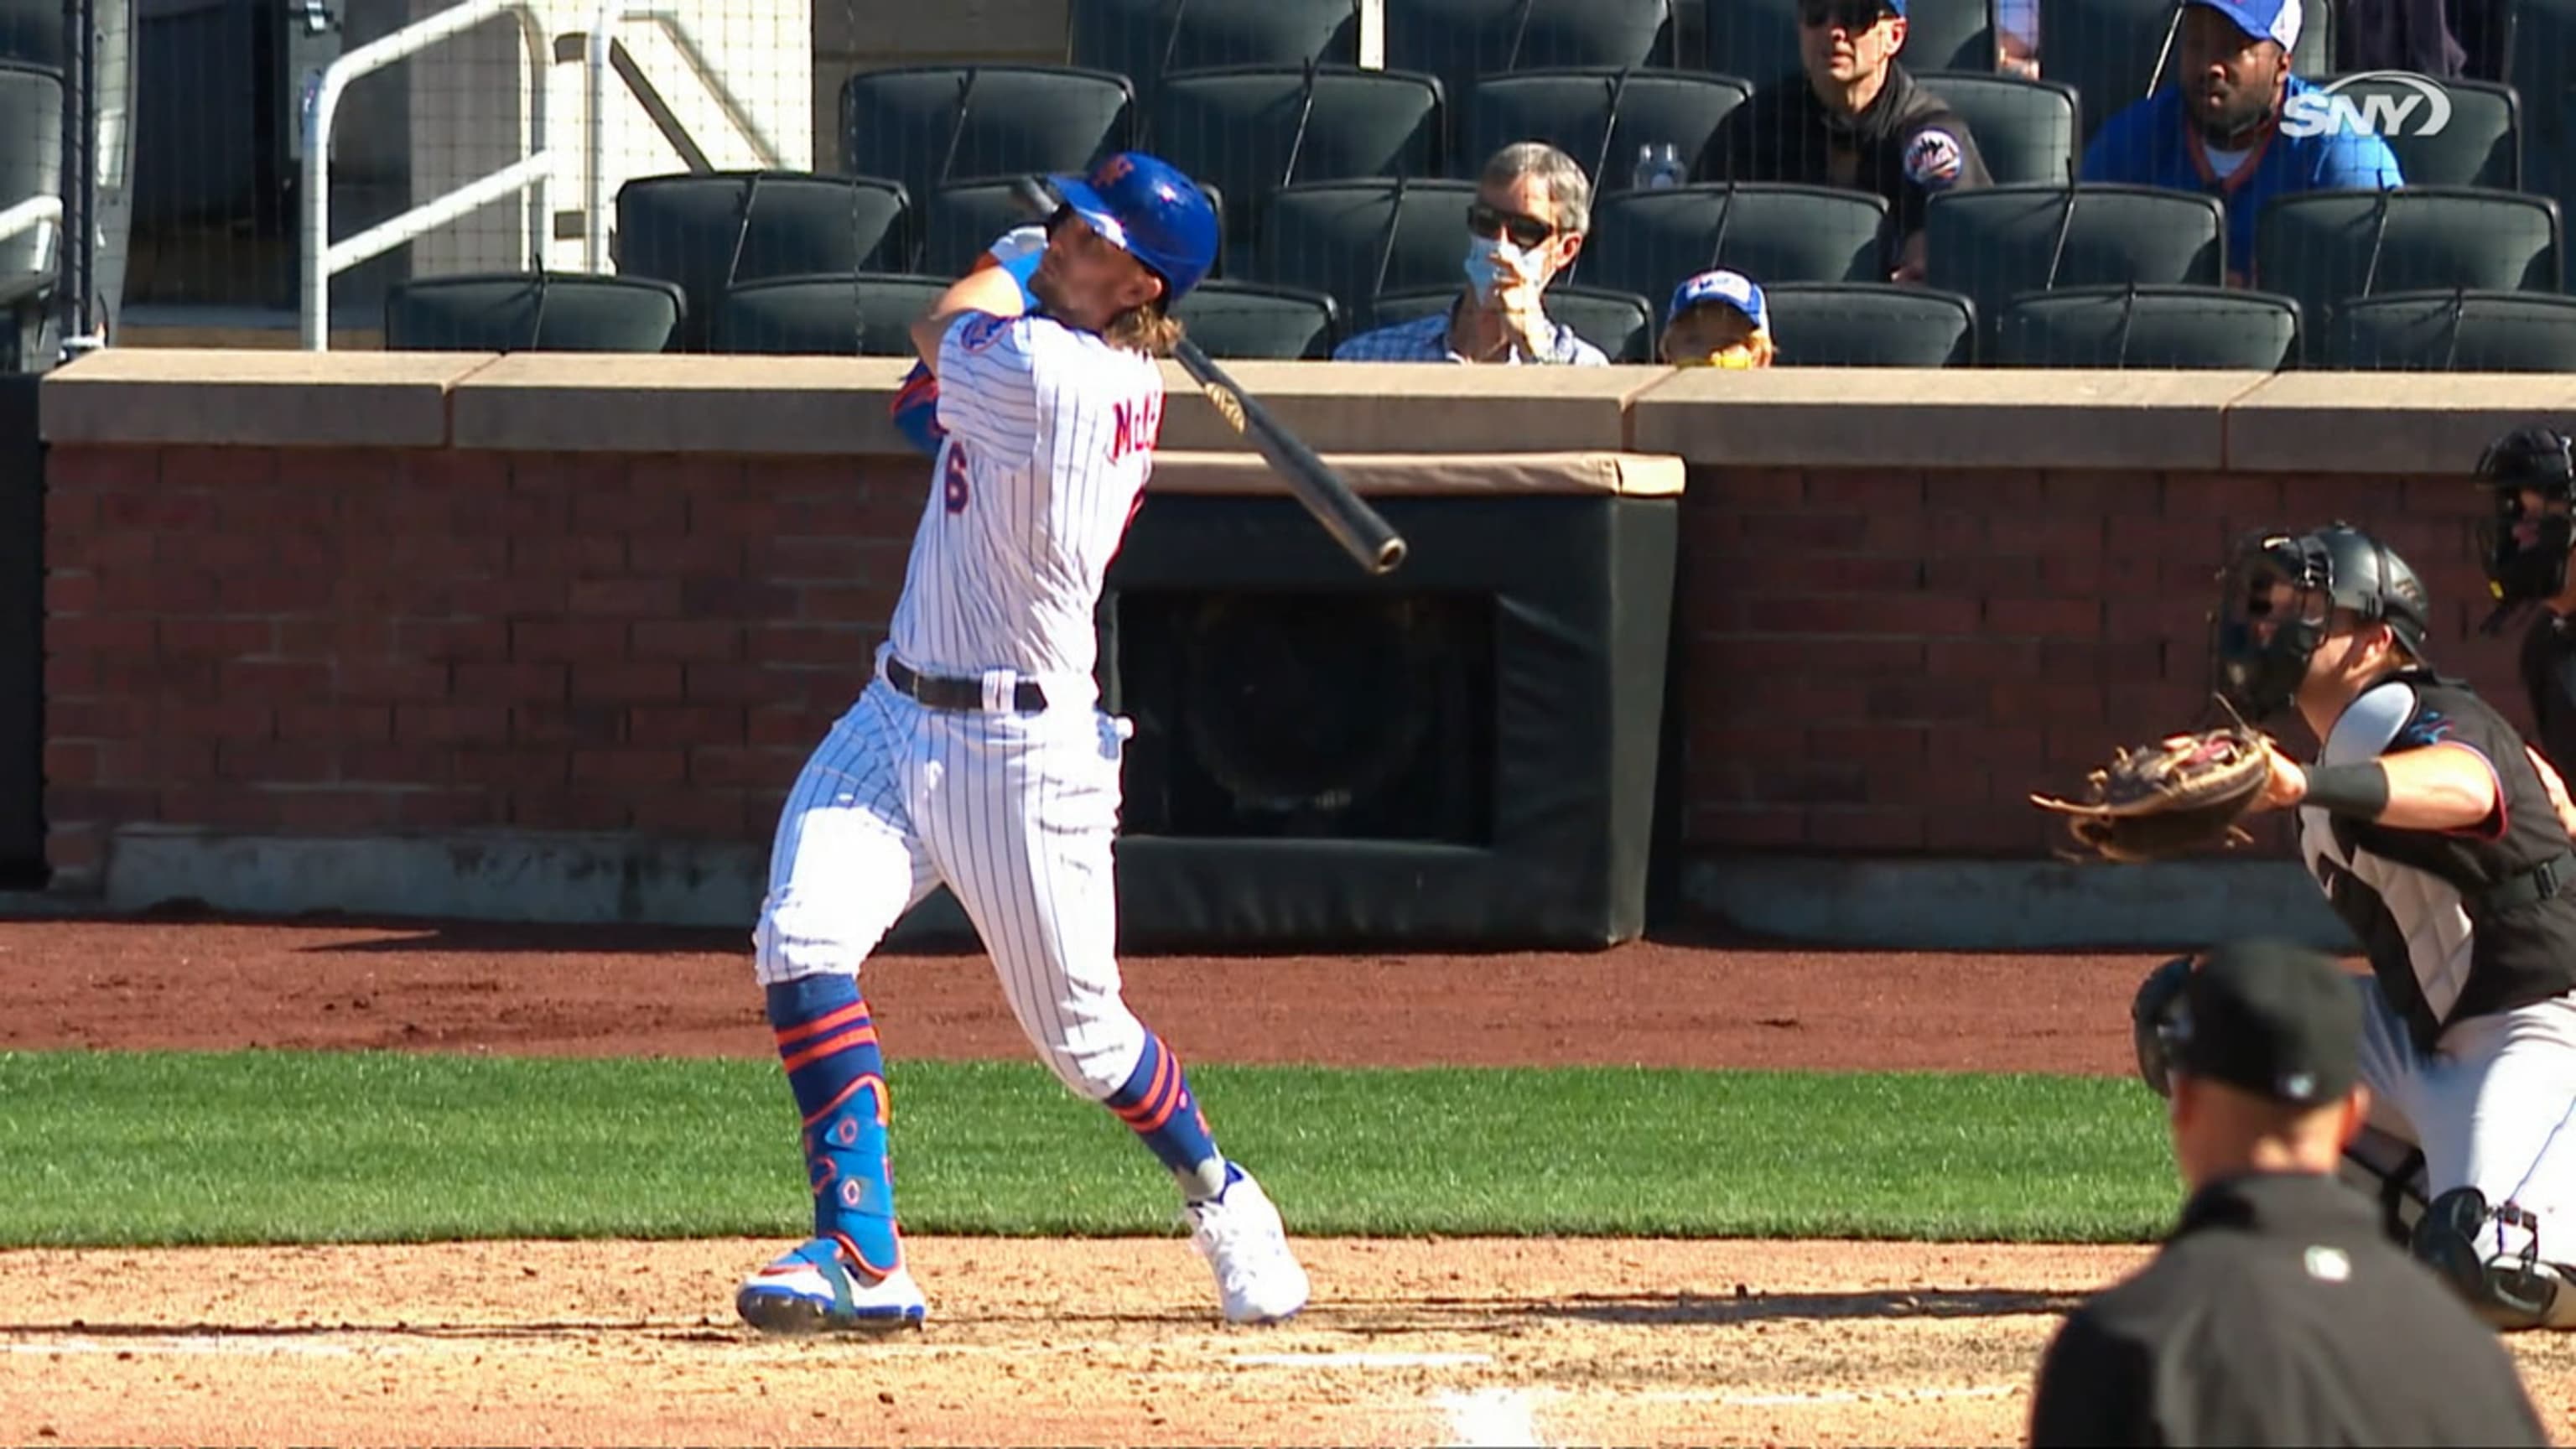 Michael Conforto's pinch-hit, 3-run home run pushes NY Mets over Nationals